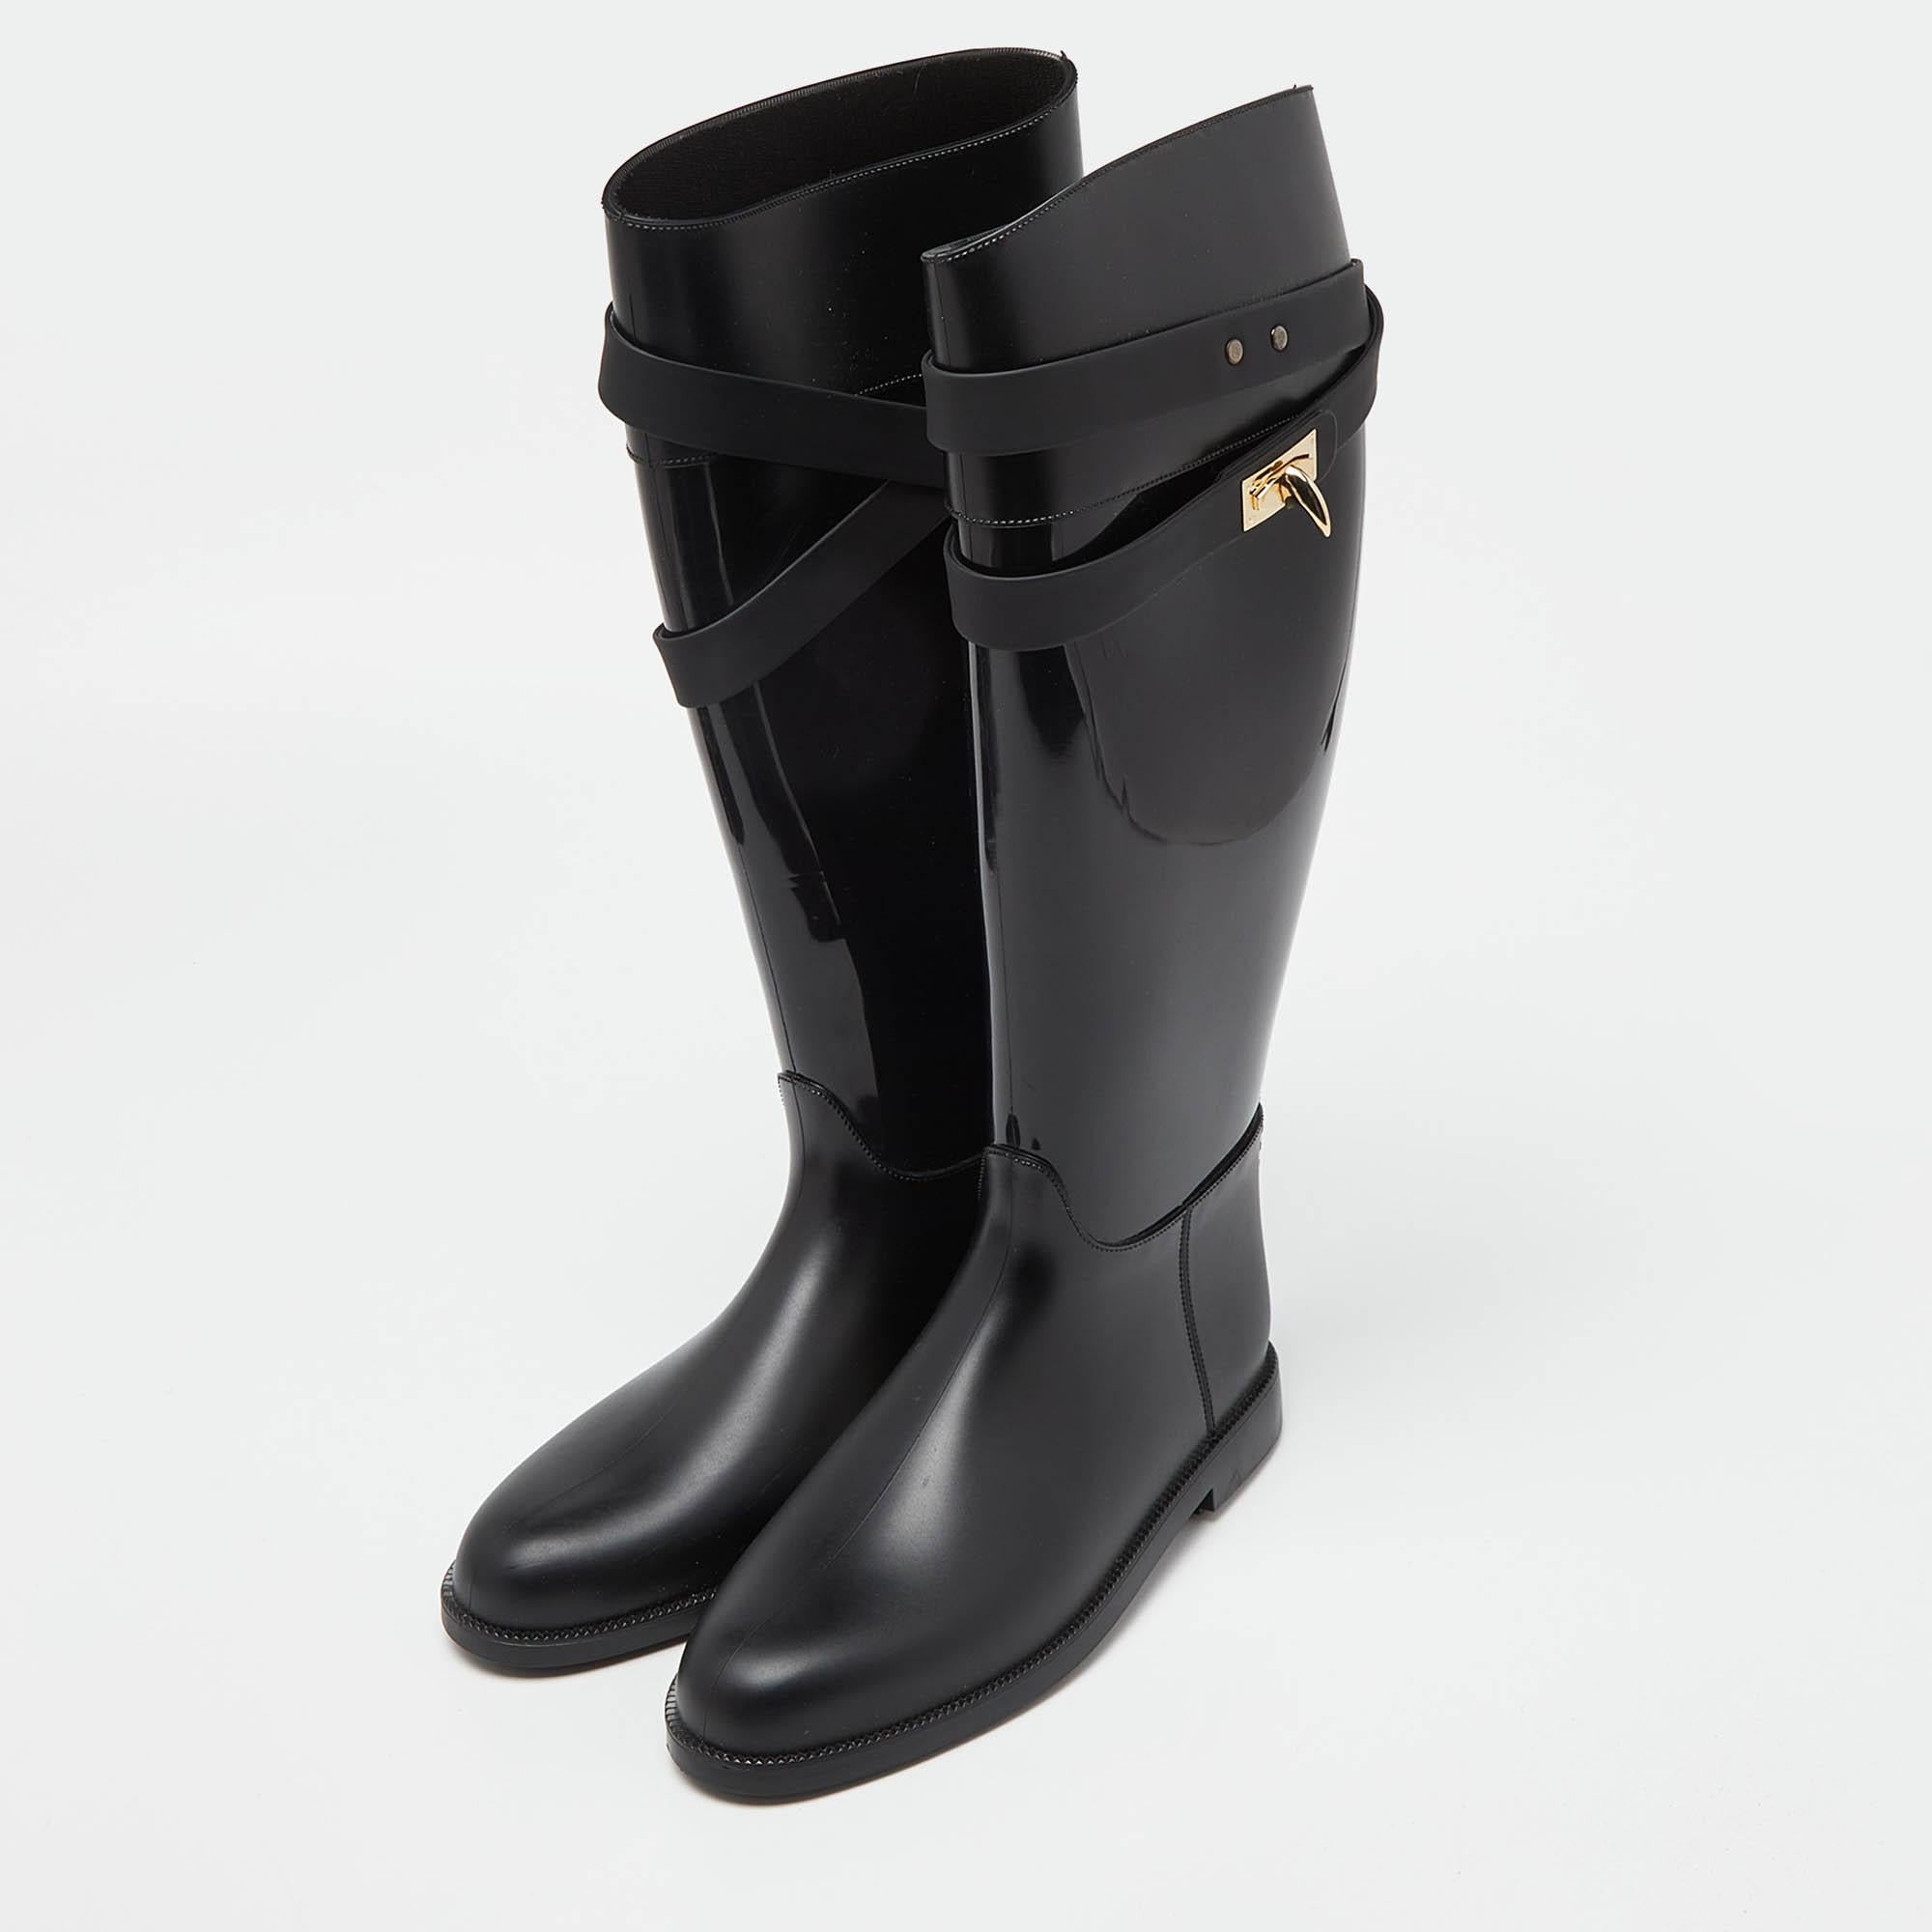  Givenchy Black Rubber Shark Lock Flat Knee Boots Taille 39 Pour femmes 